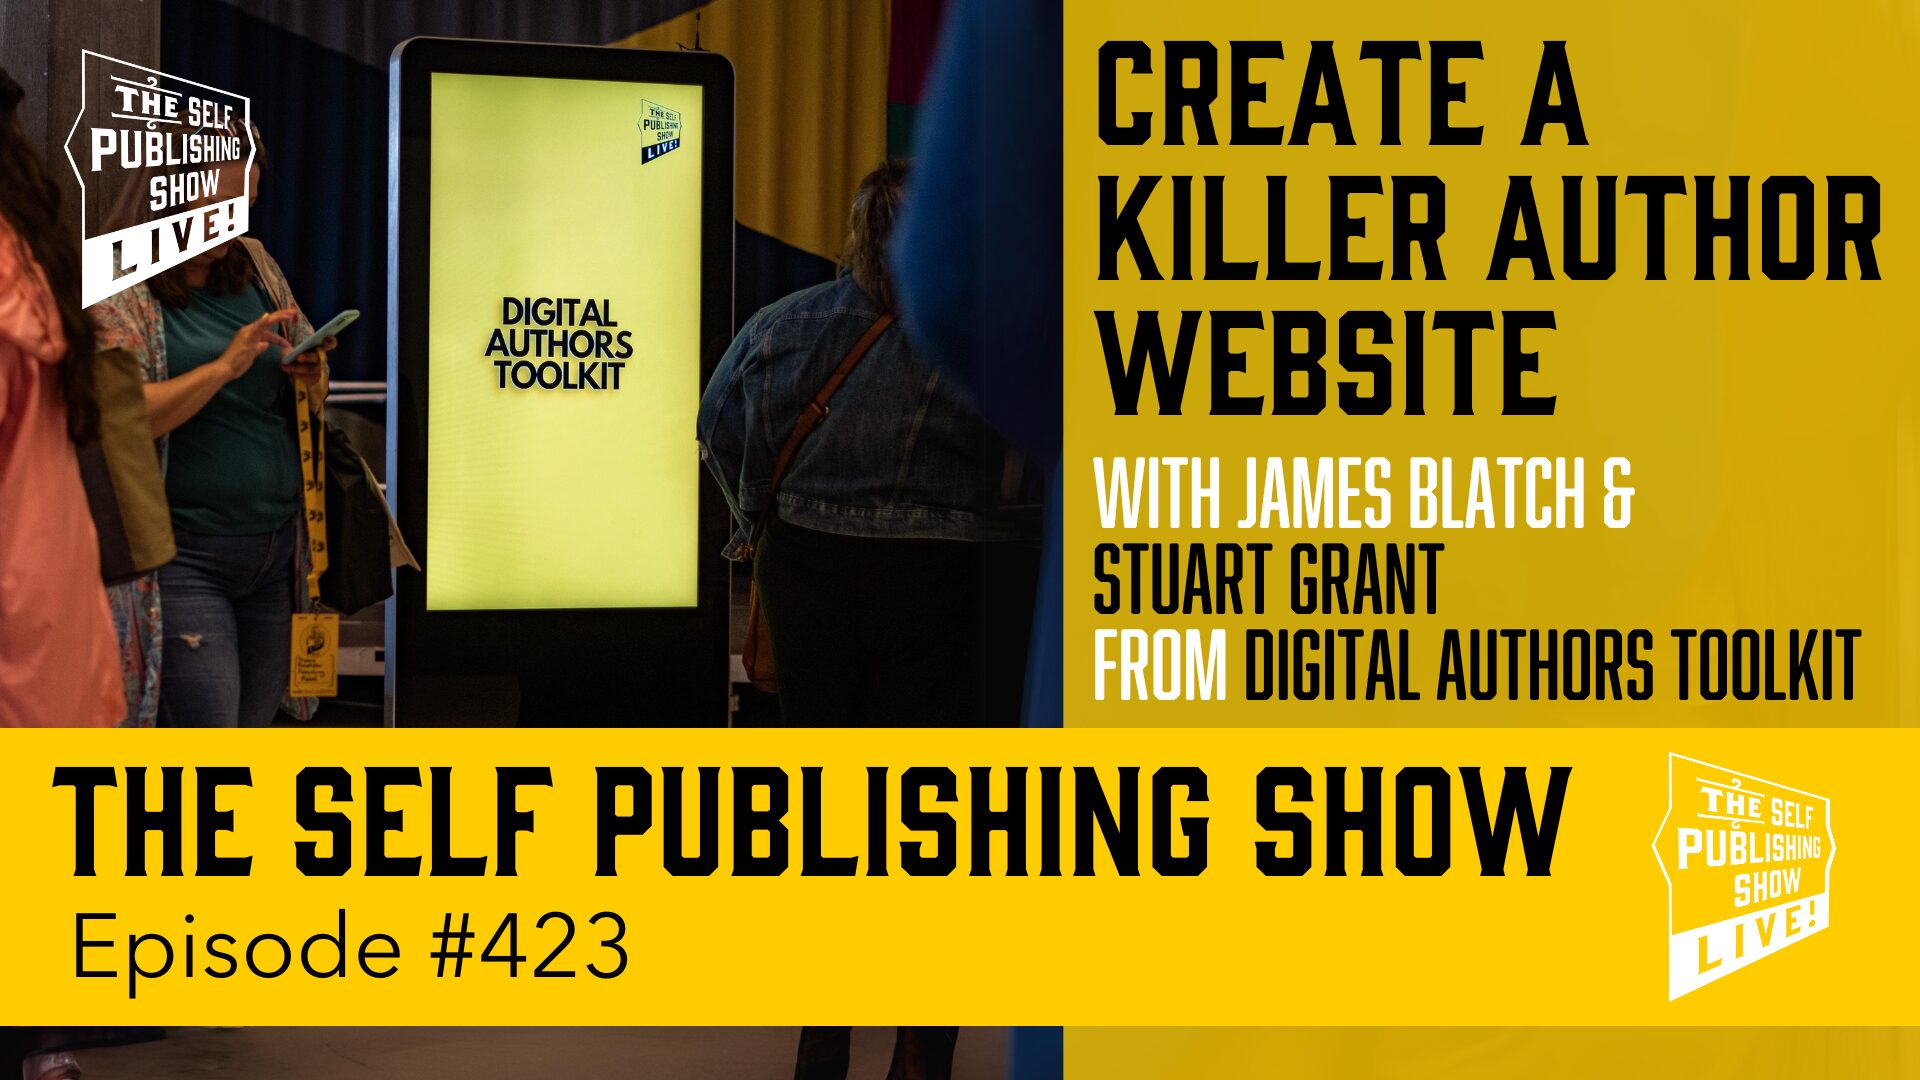 promotional image for podcast episode 423 - create a killer author website with James Blatch and Stuart Grant